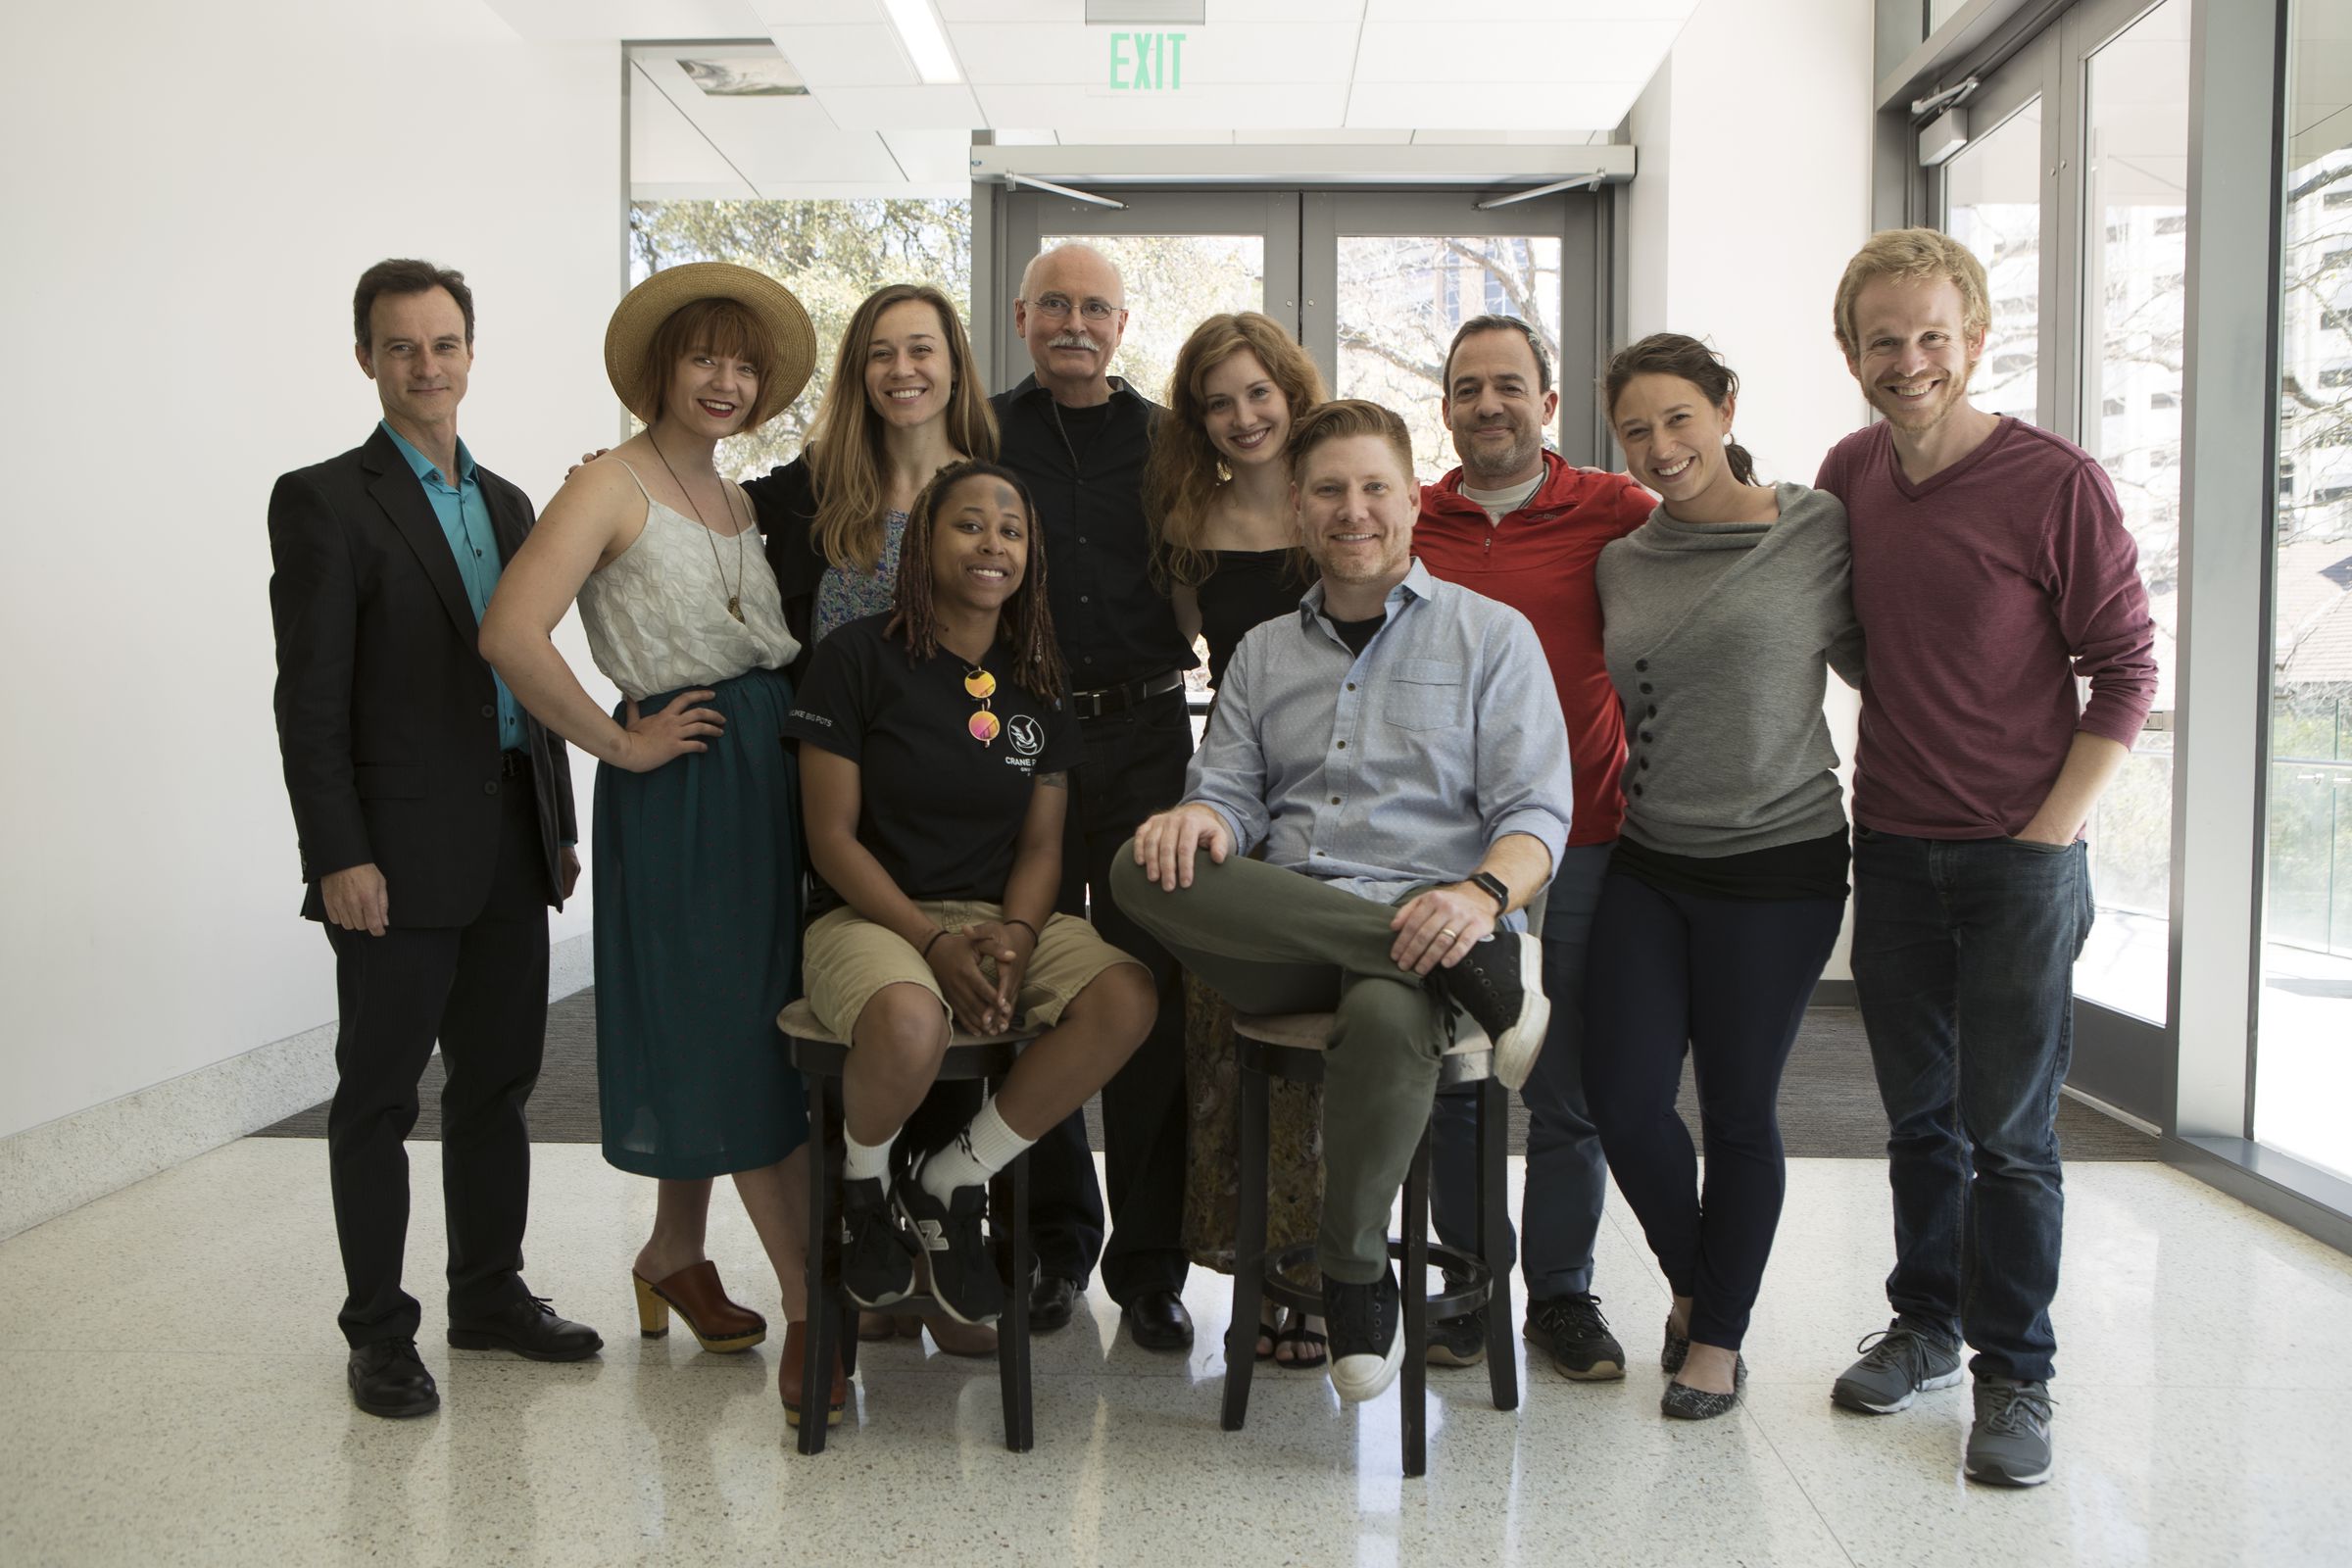 From left to right: Ken Ingraham, Christy Casey, Joanna Harmon, Imani Dabney (participant), Jeff Wirth, Paige Keane, Bryan Bishop (participant), Carlo D’Amore, Olivia Jimenez, Kevin Percival.